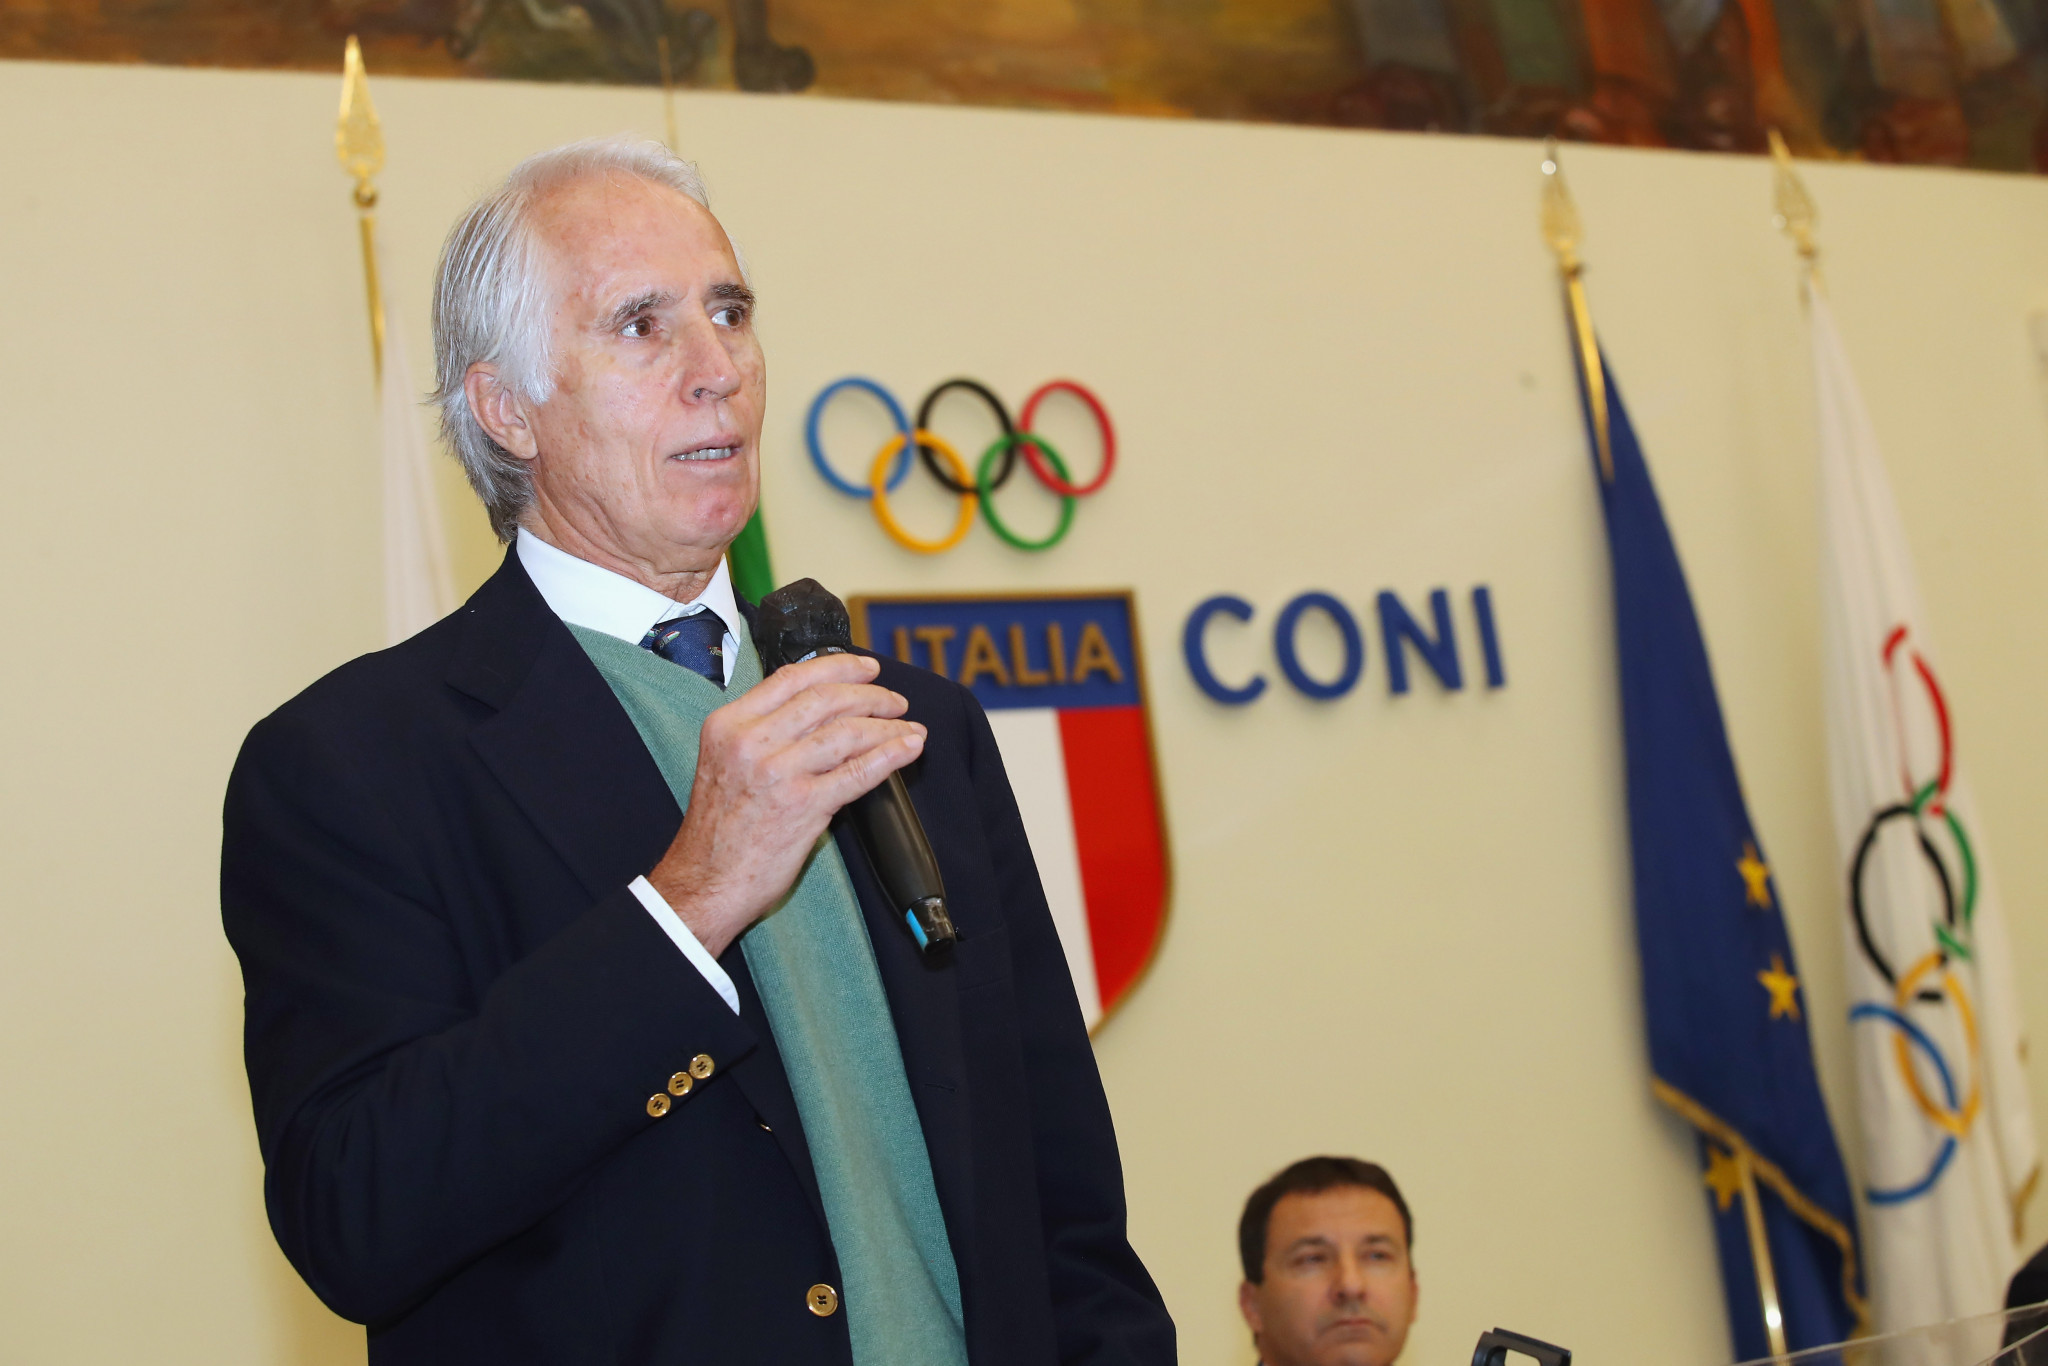 International Olympic Committee member Giovanni Malagò claims the relocation 